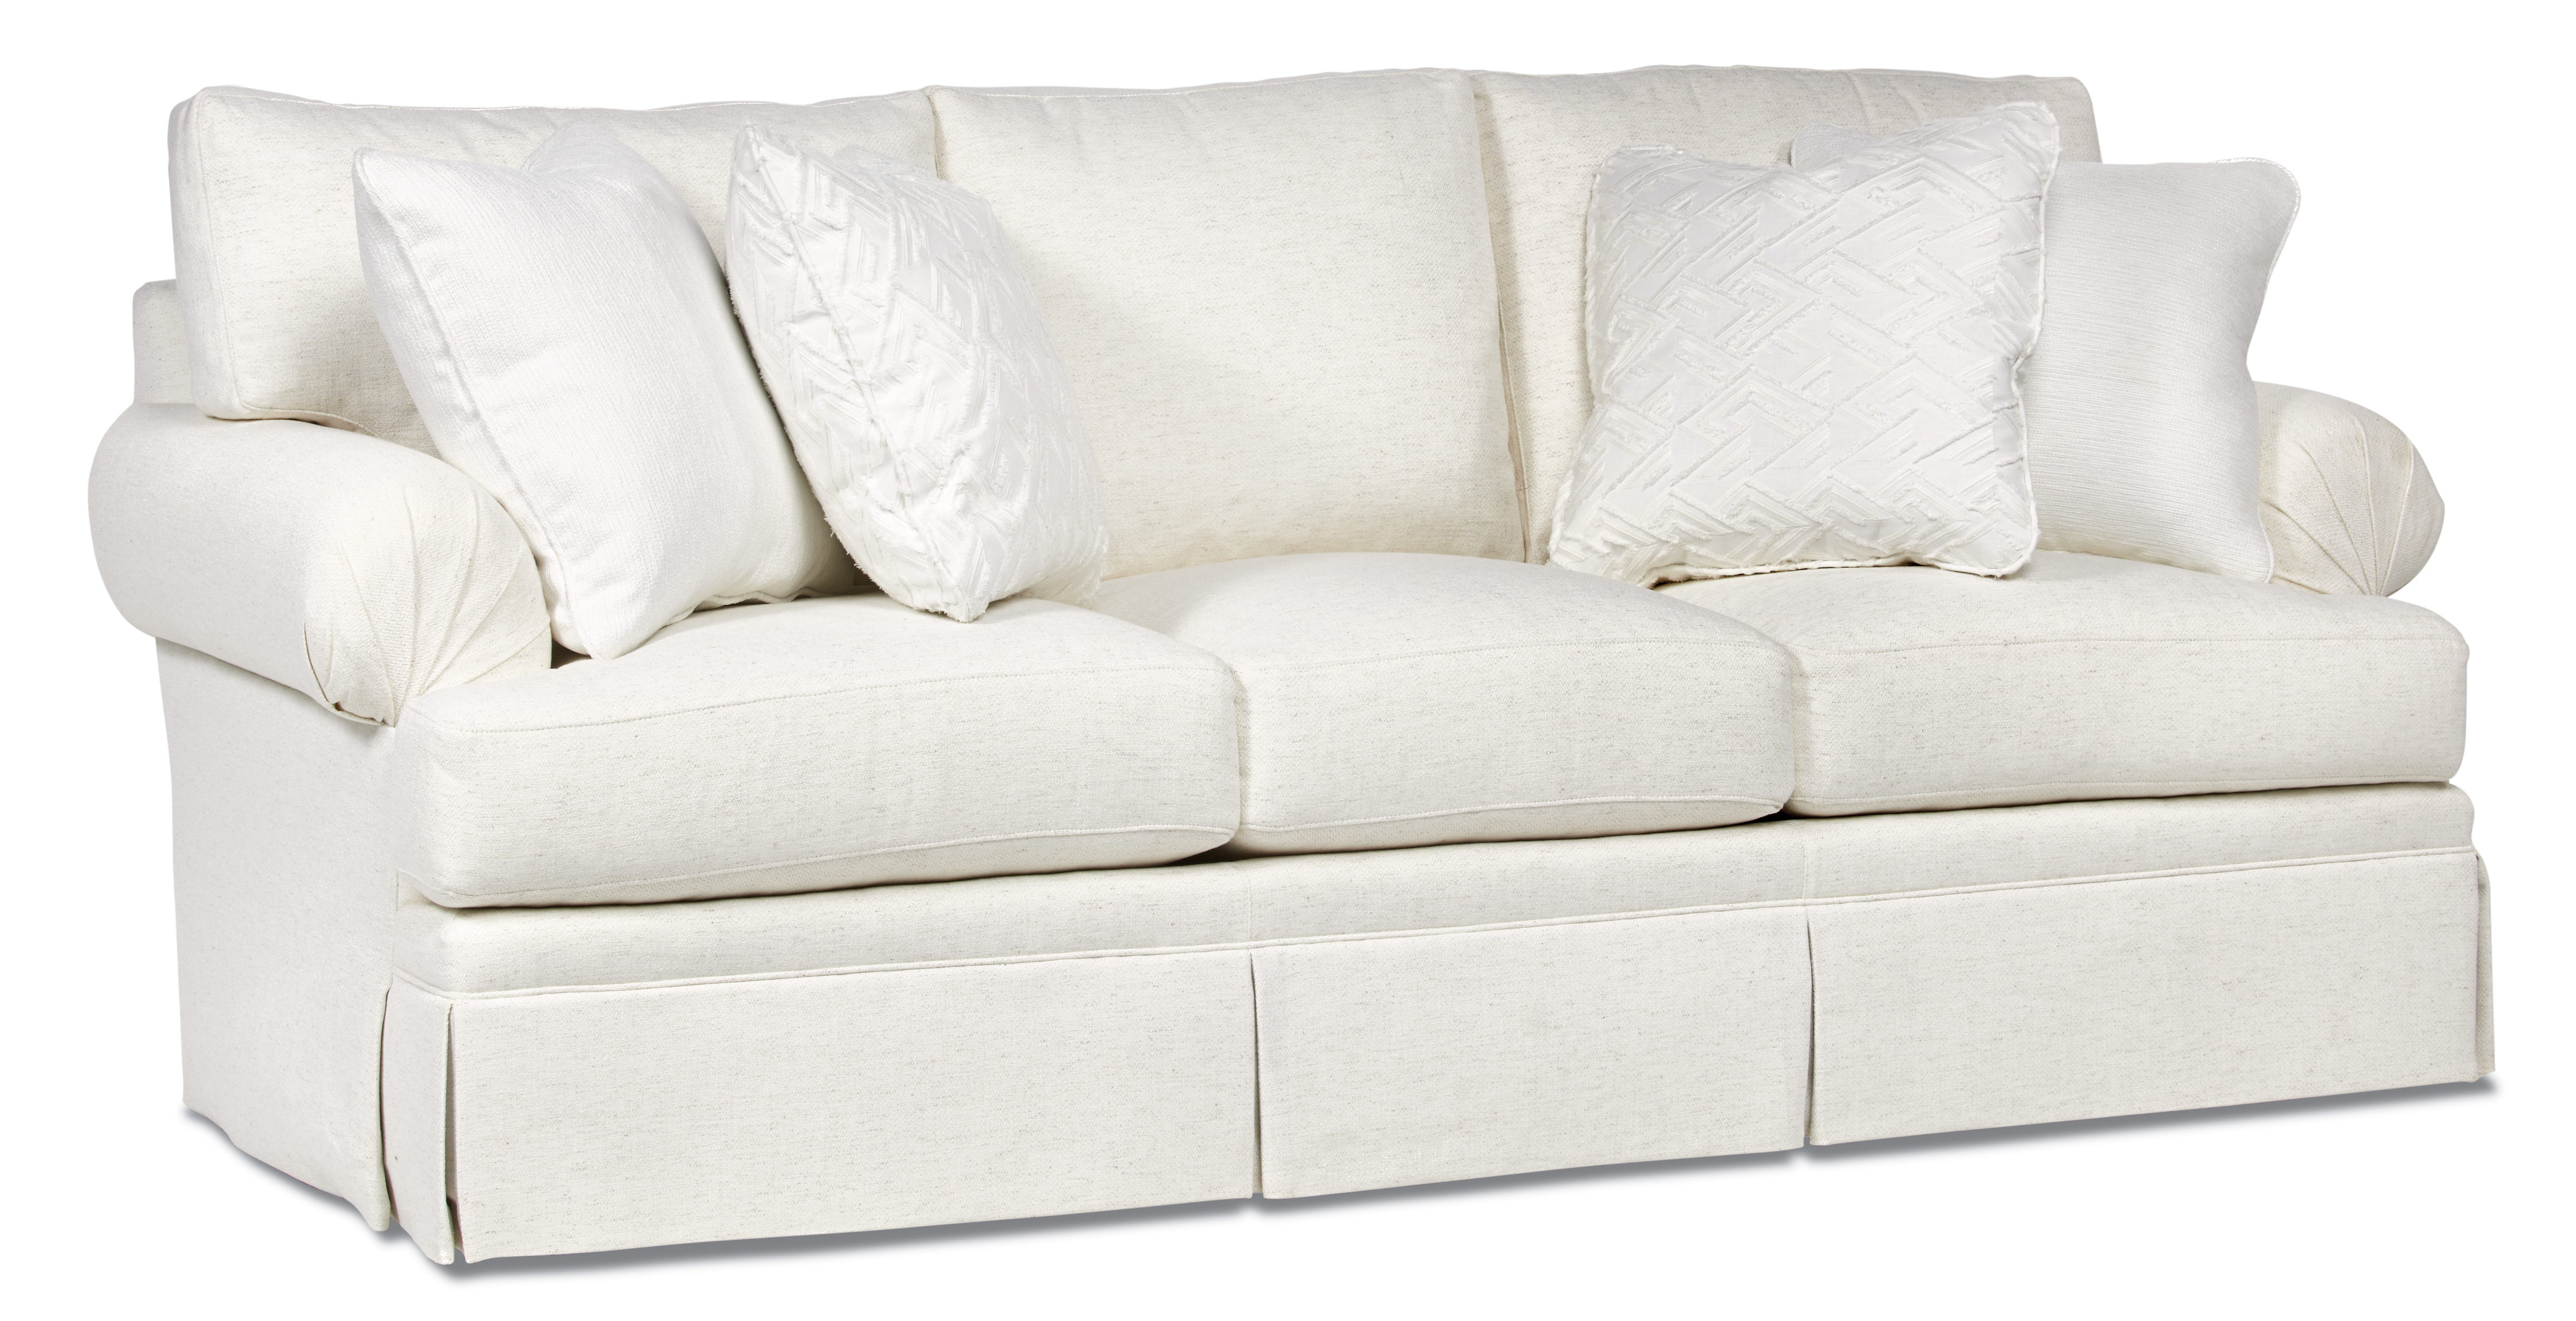 wefixanysofa on X: More sofas made like-new again! We replace